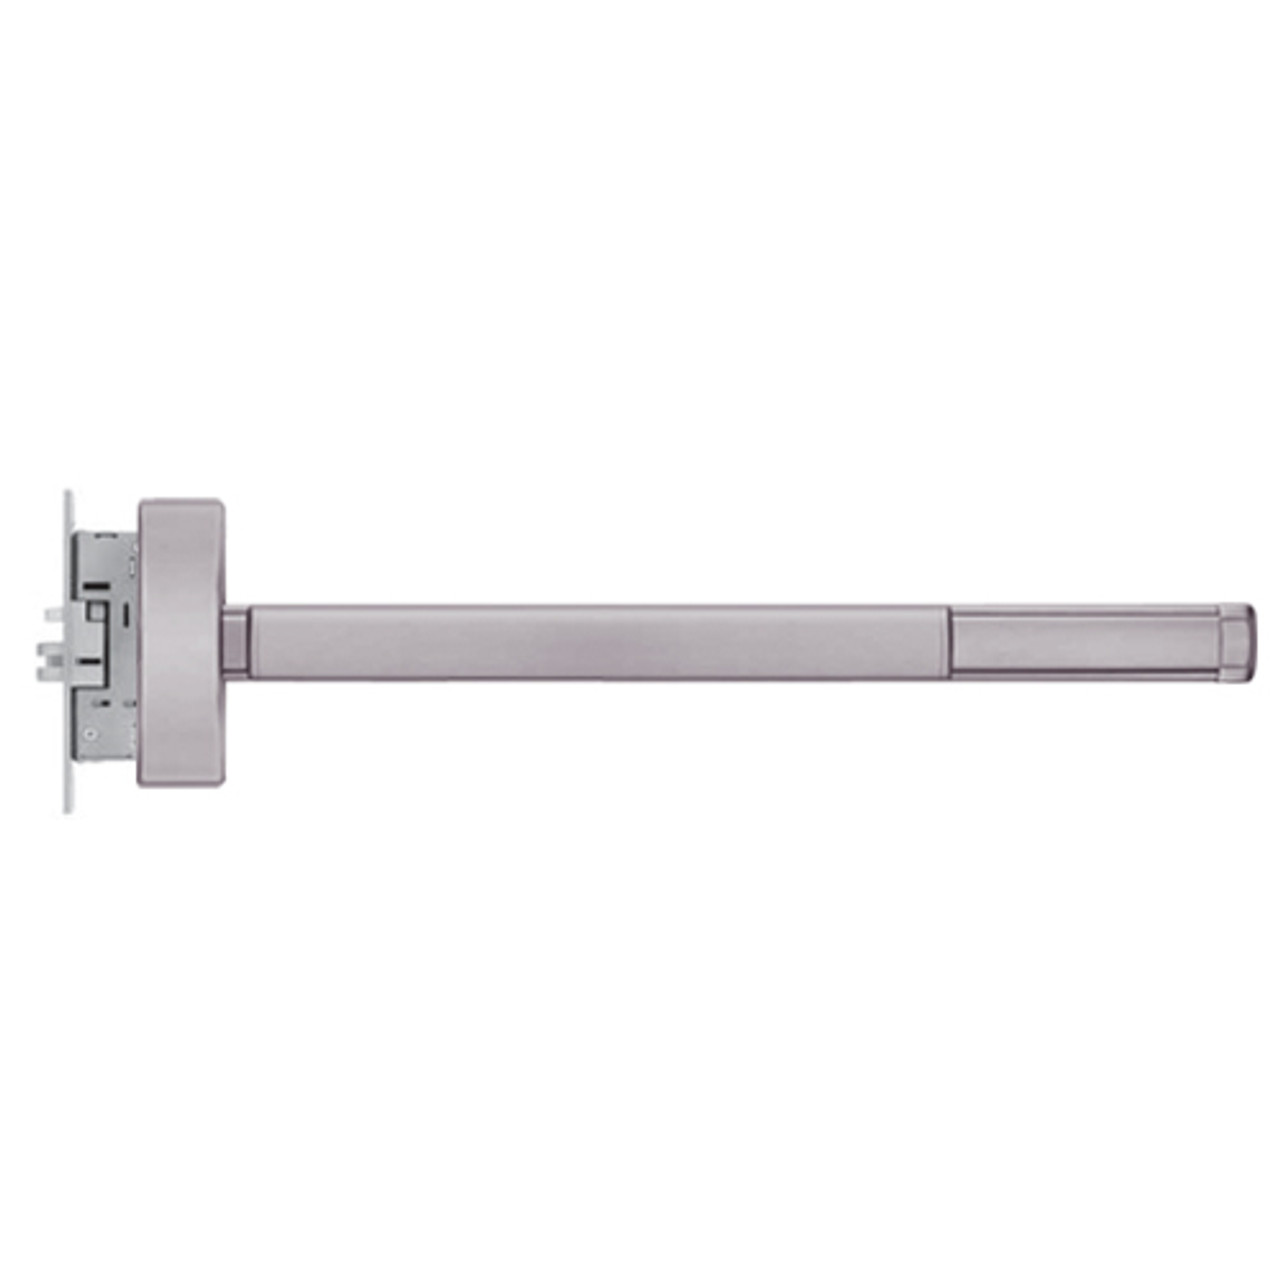 TS2305-LHR-630-48 PHI 2300 Series Apex Mortise Exit Device with Touchbar Monitoring Switch Prepped for Key Controls Thumb Piece in Satin Stainless Steel Finish